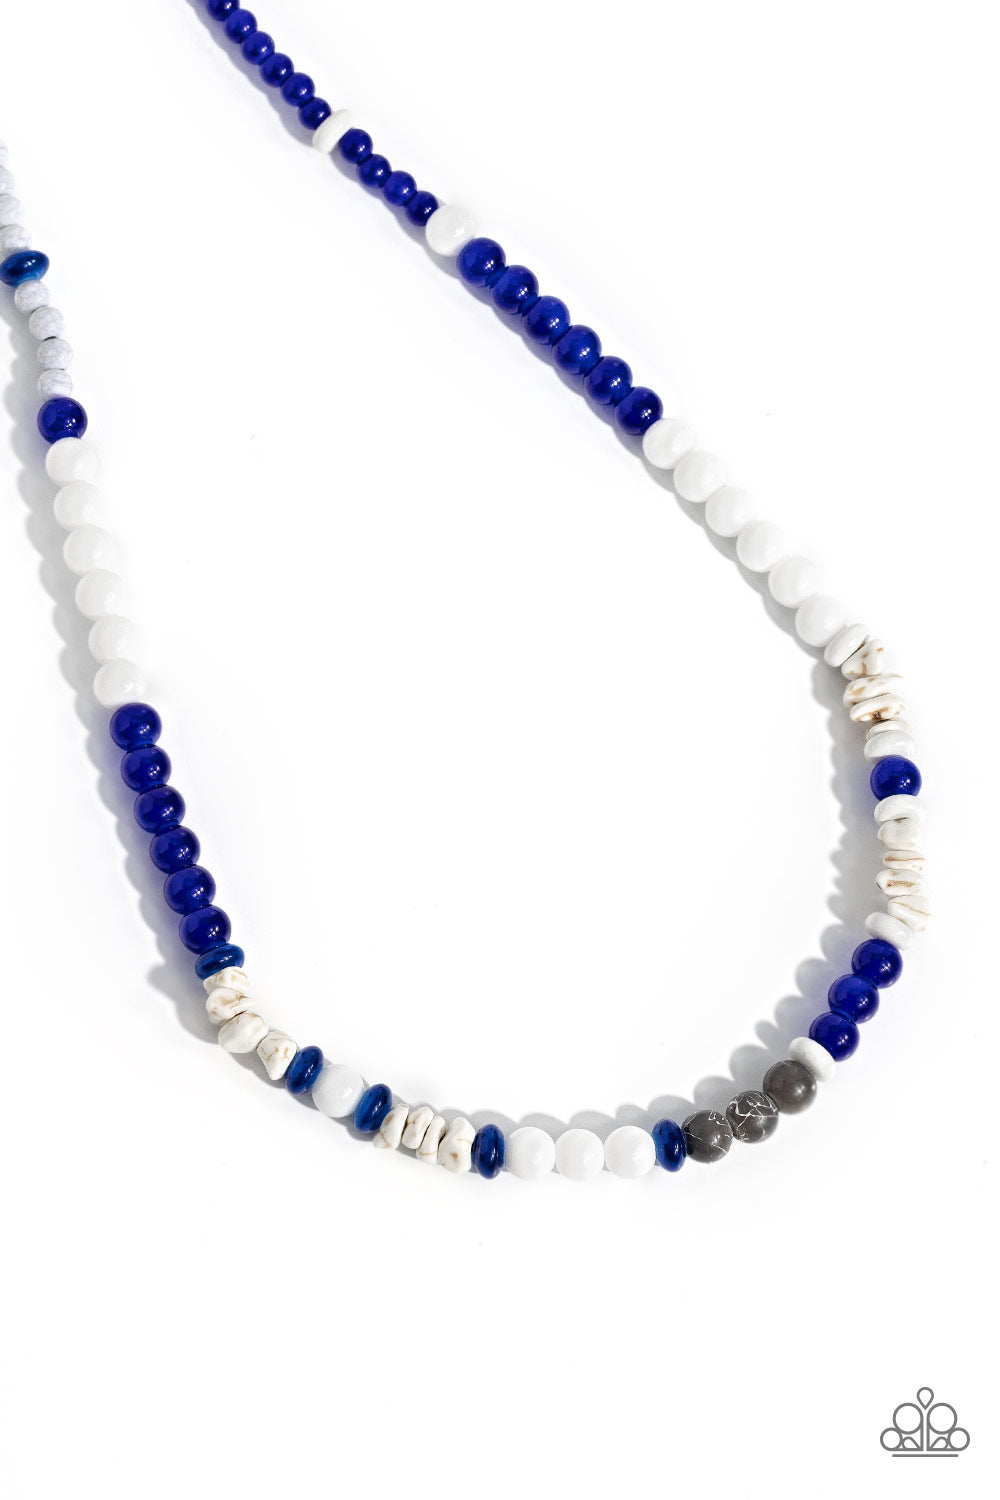 Beaded Bravery Blue Unisex Necklace - Paparazzi Accessories  Colorful sections of blue and white beads and gray crackle bead accents adorn a strand of chiseled and round white marbled stones and stone beads, creating an earthy compliment below the collar. Features an adjustable clasp closure. As the stone elements in this piece are natural, some color variation is normal.  Sold as one individual necklace.  P2SE-URBL-070XX